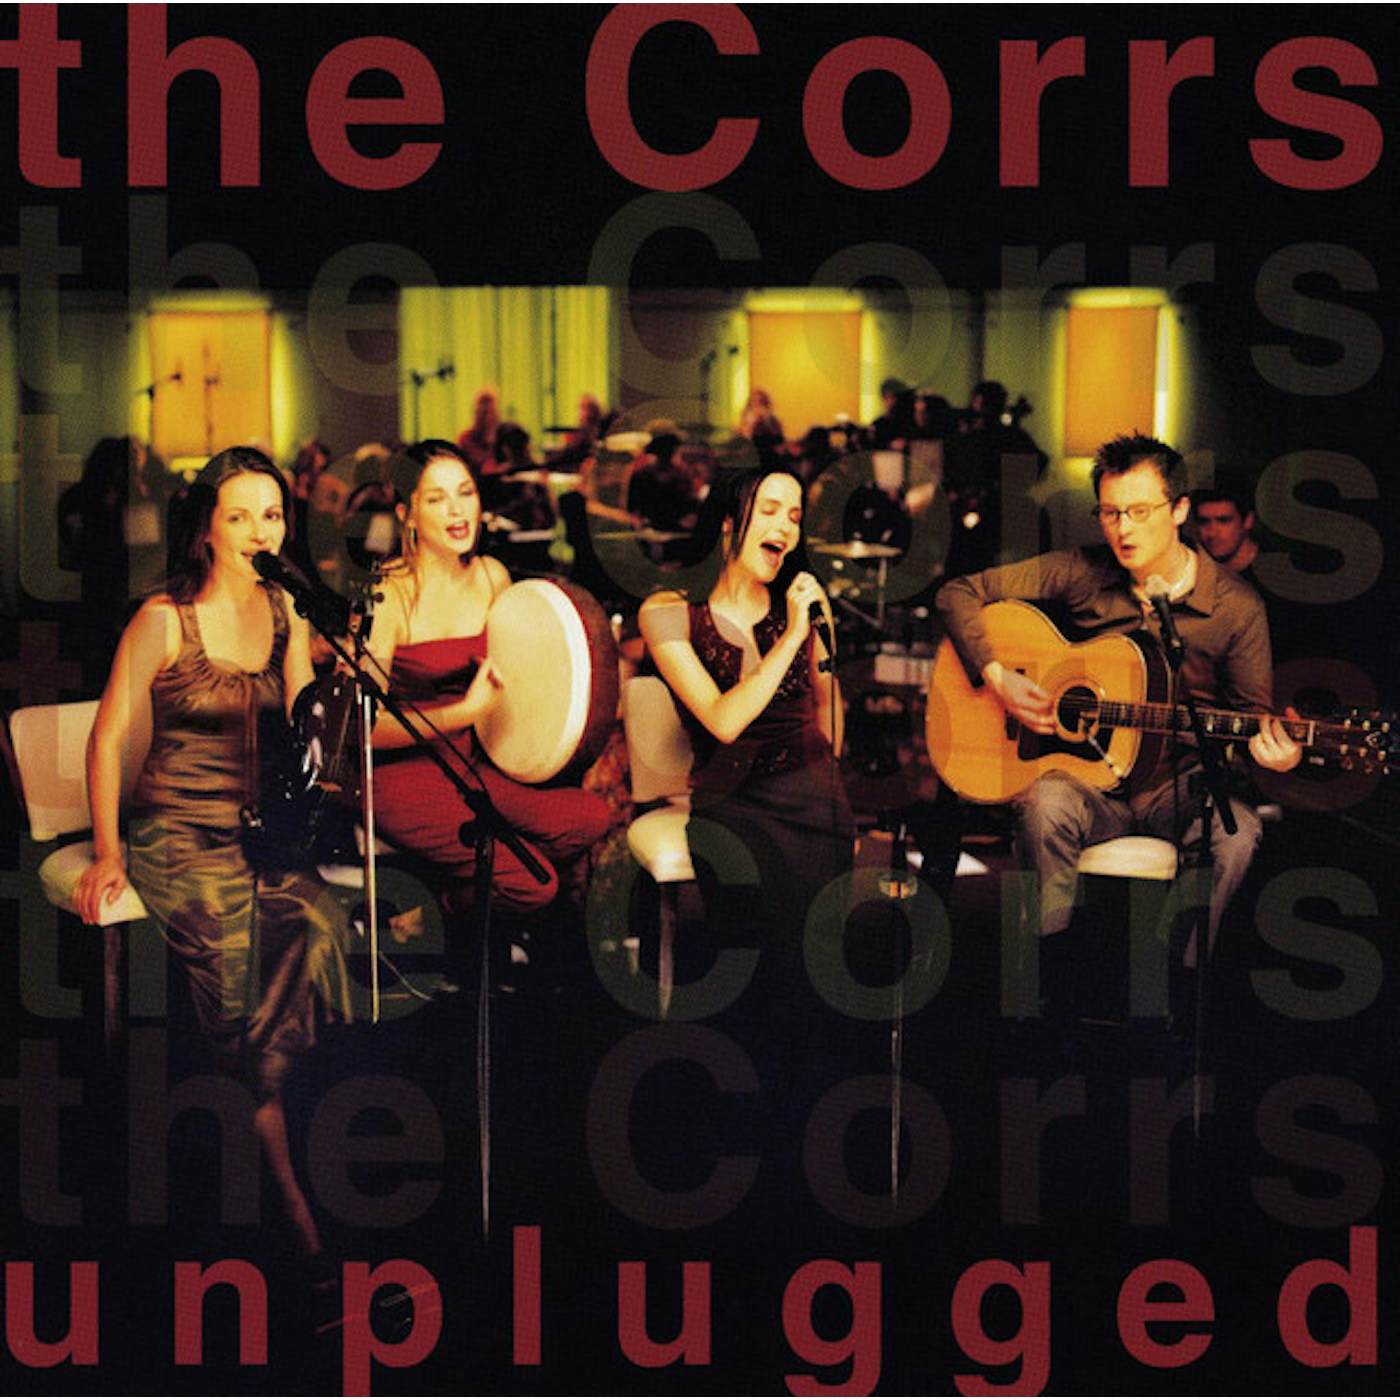 The Corrs UNPLUGGED CD